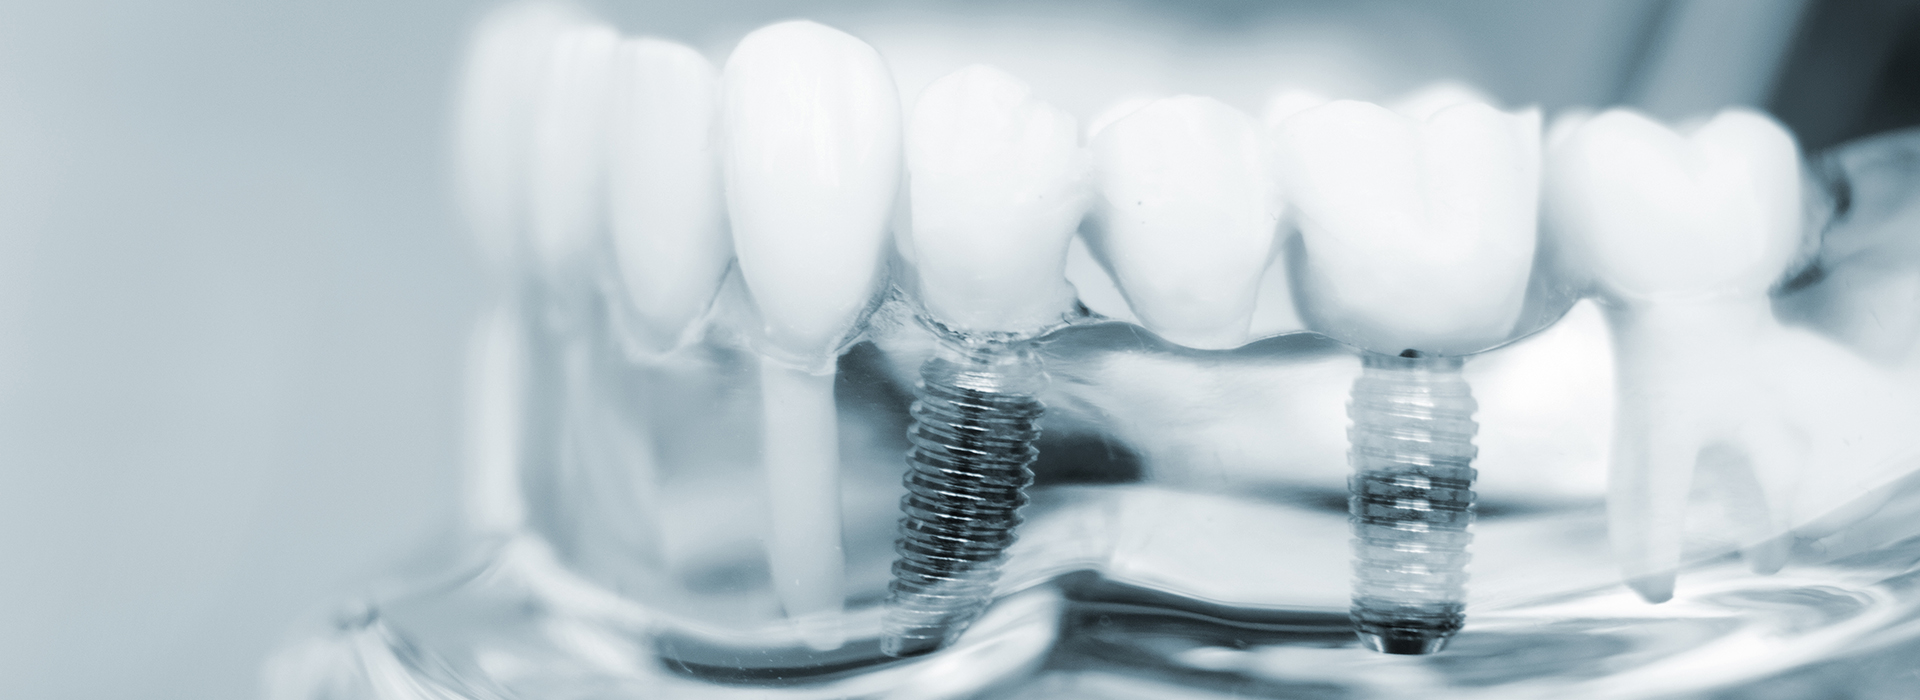 Remmers Dental | Emergency Treatment, Sports Mouthguards and Ceramic Crowns